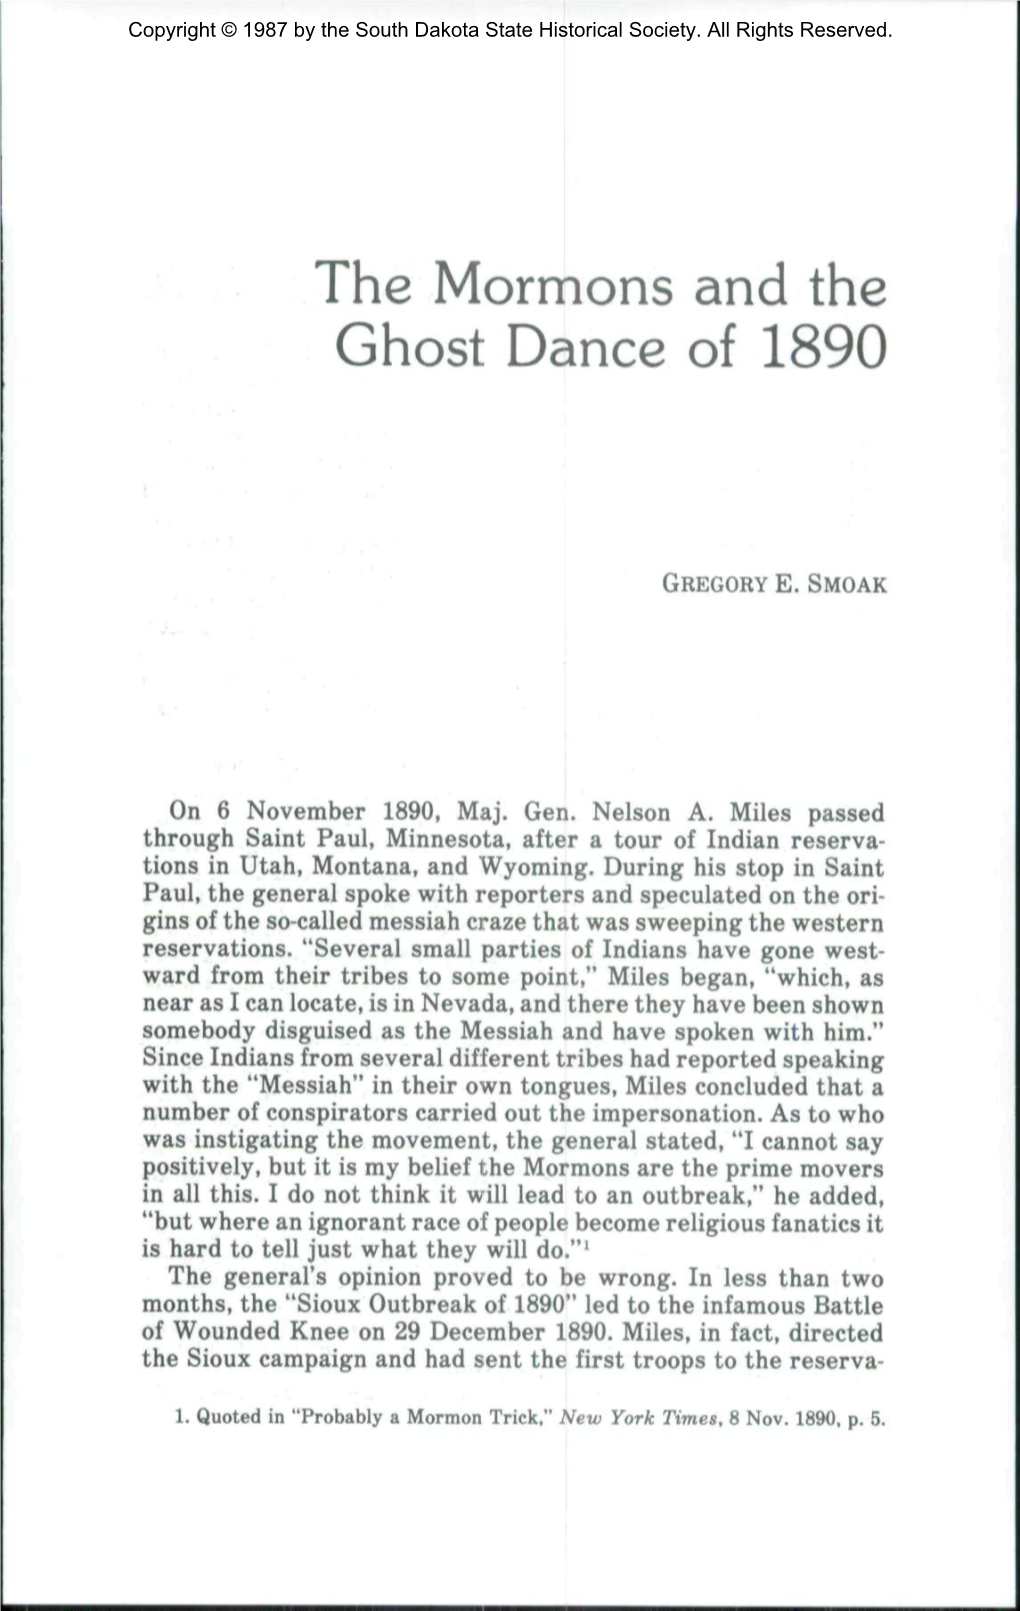 The Mormons and the Ghost Dance of 1890